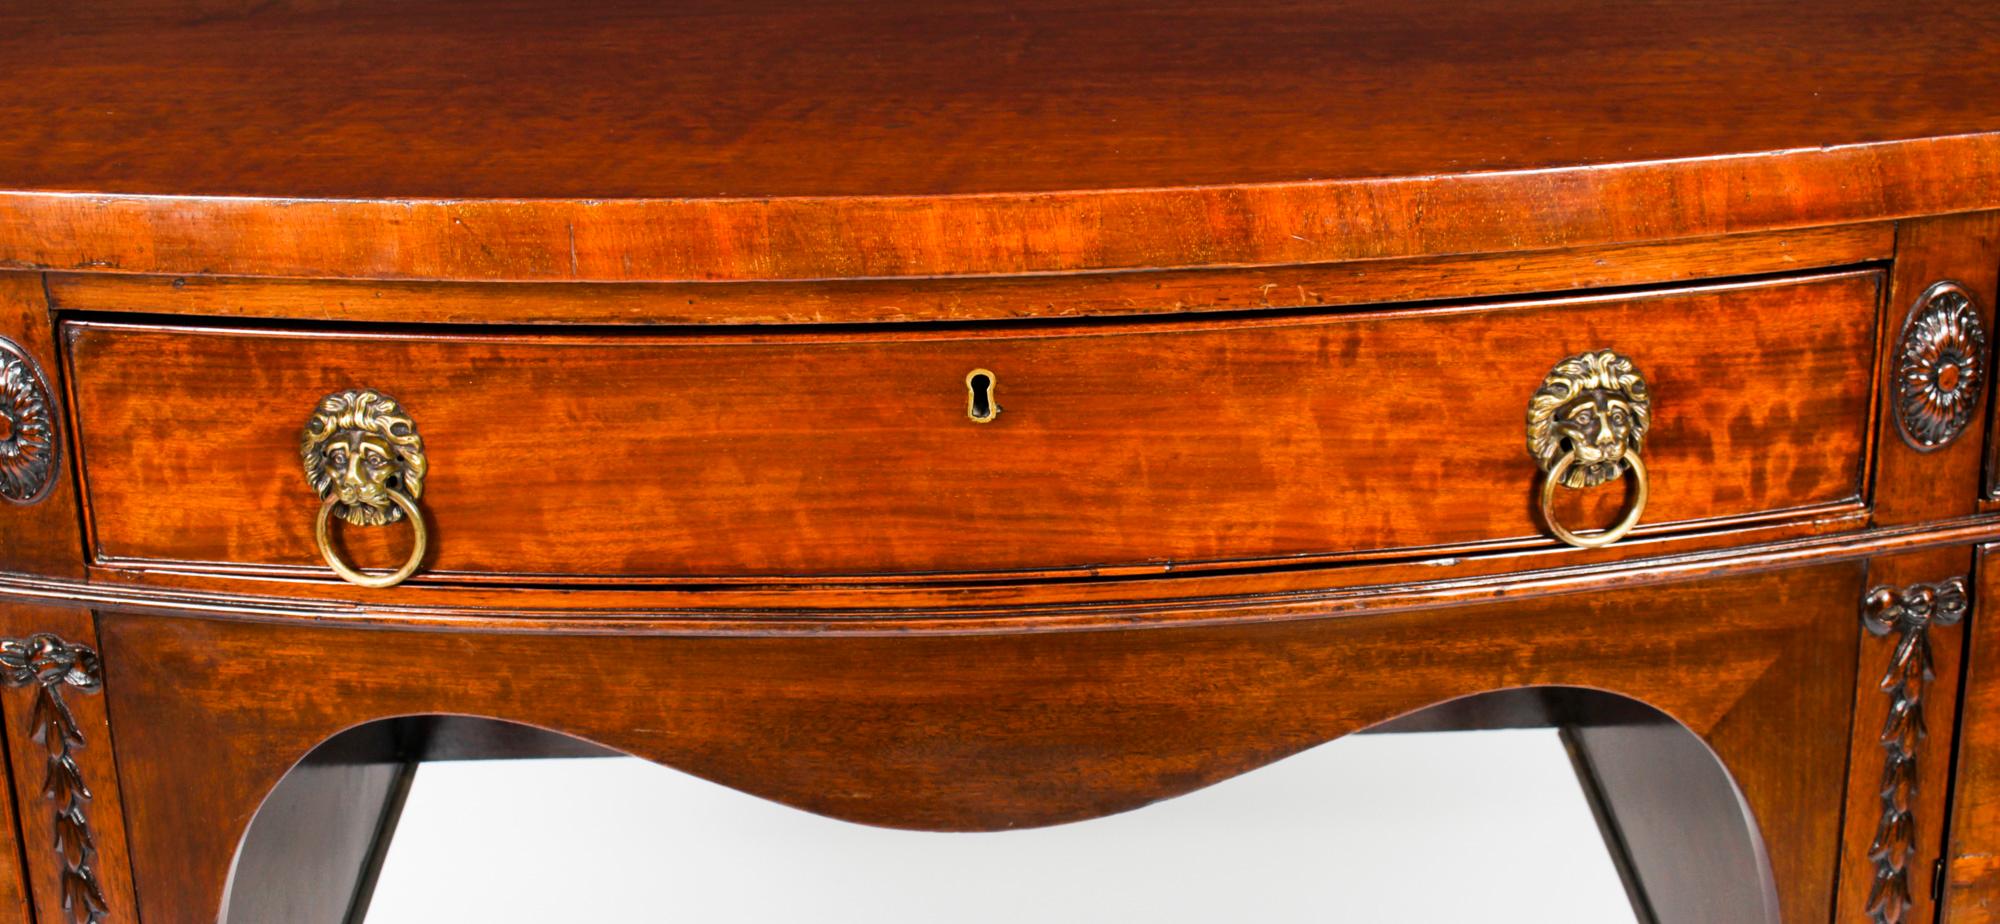 Antique George III Flame Mahogany Serpentine Sideboard, 19th Century For Sale 5